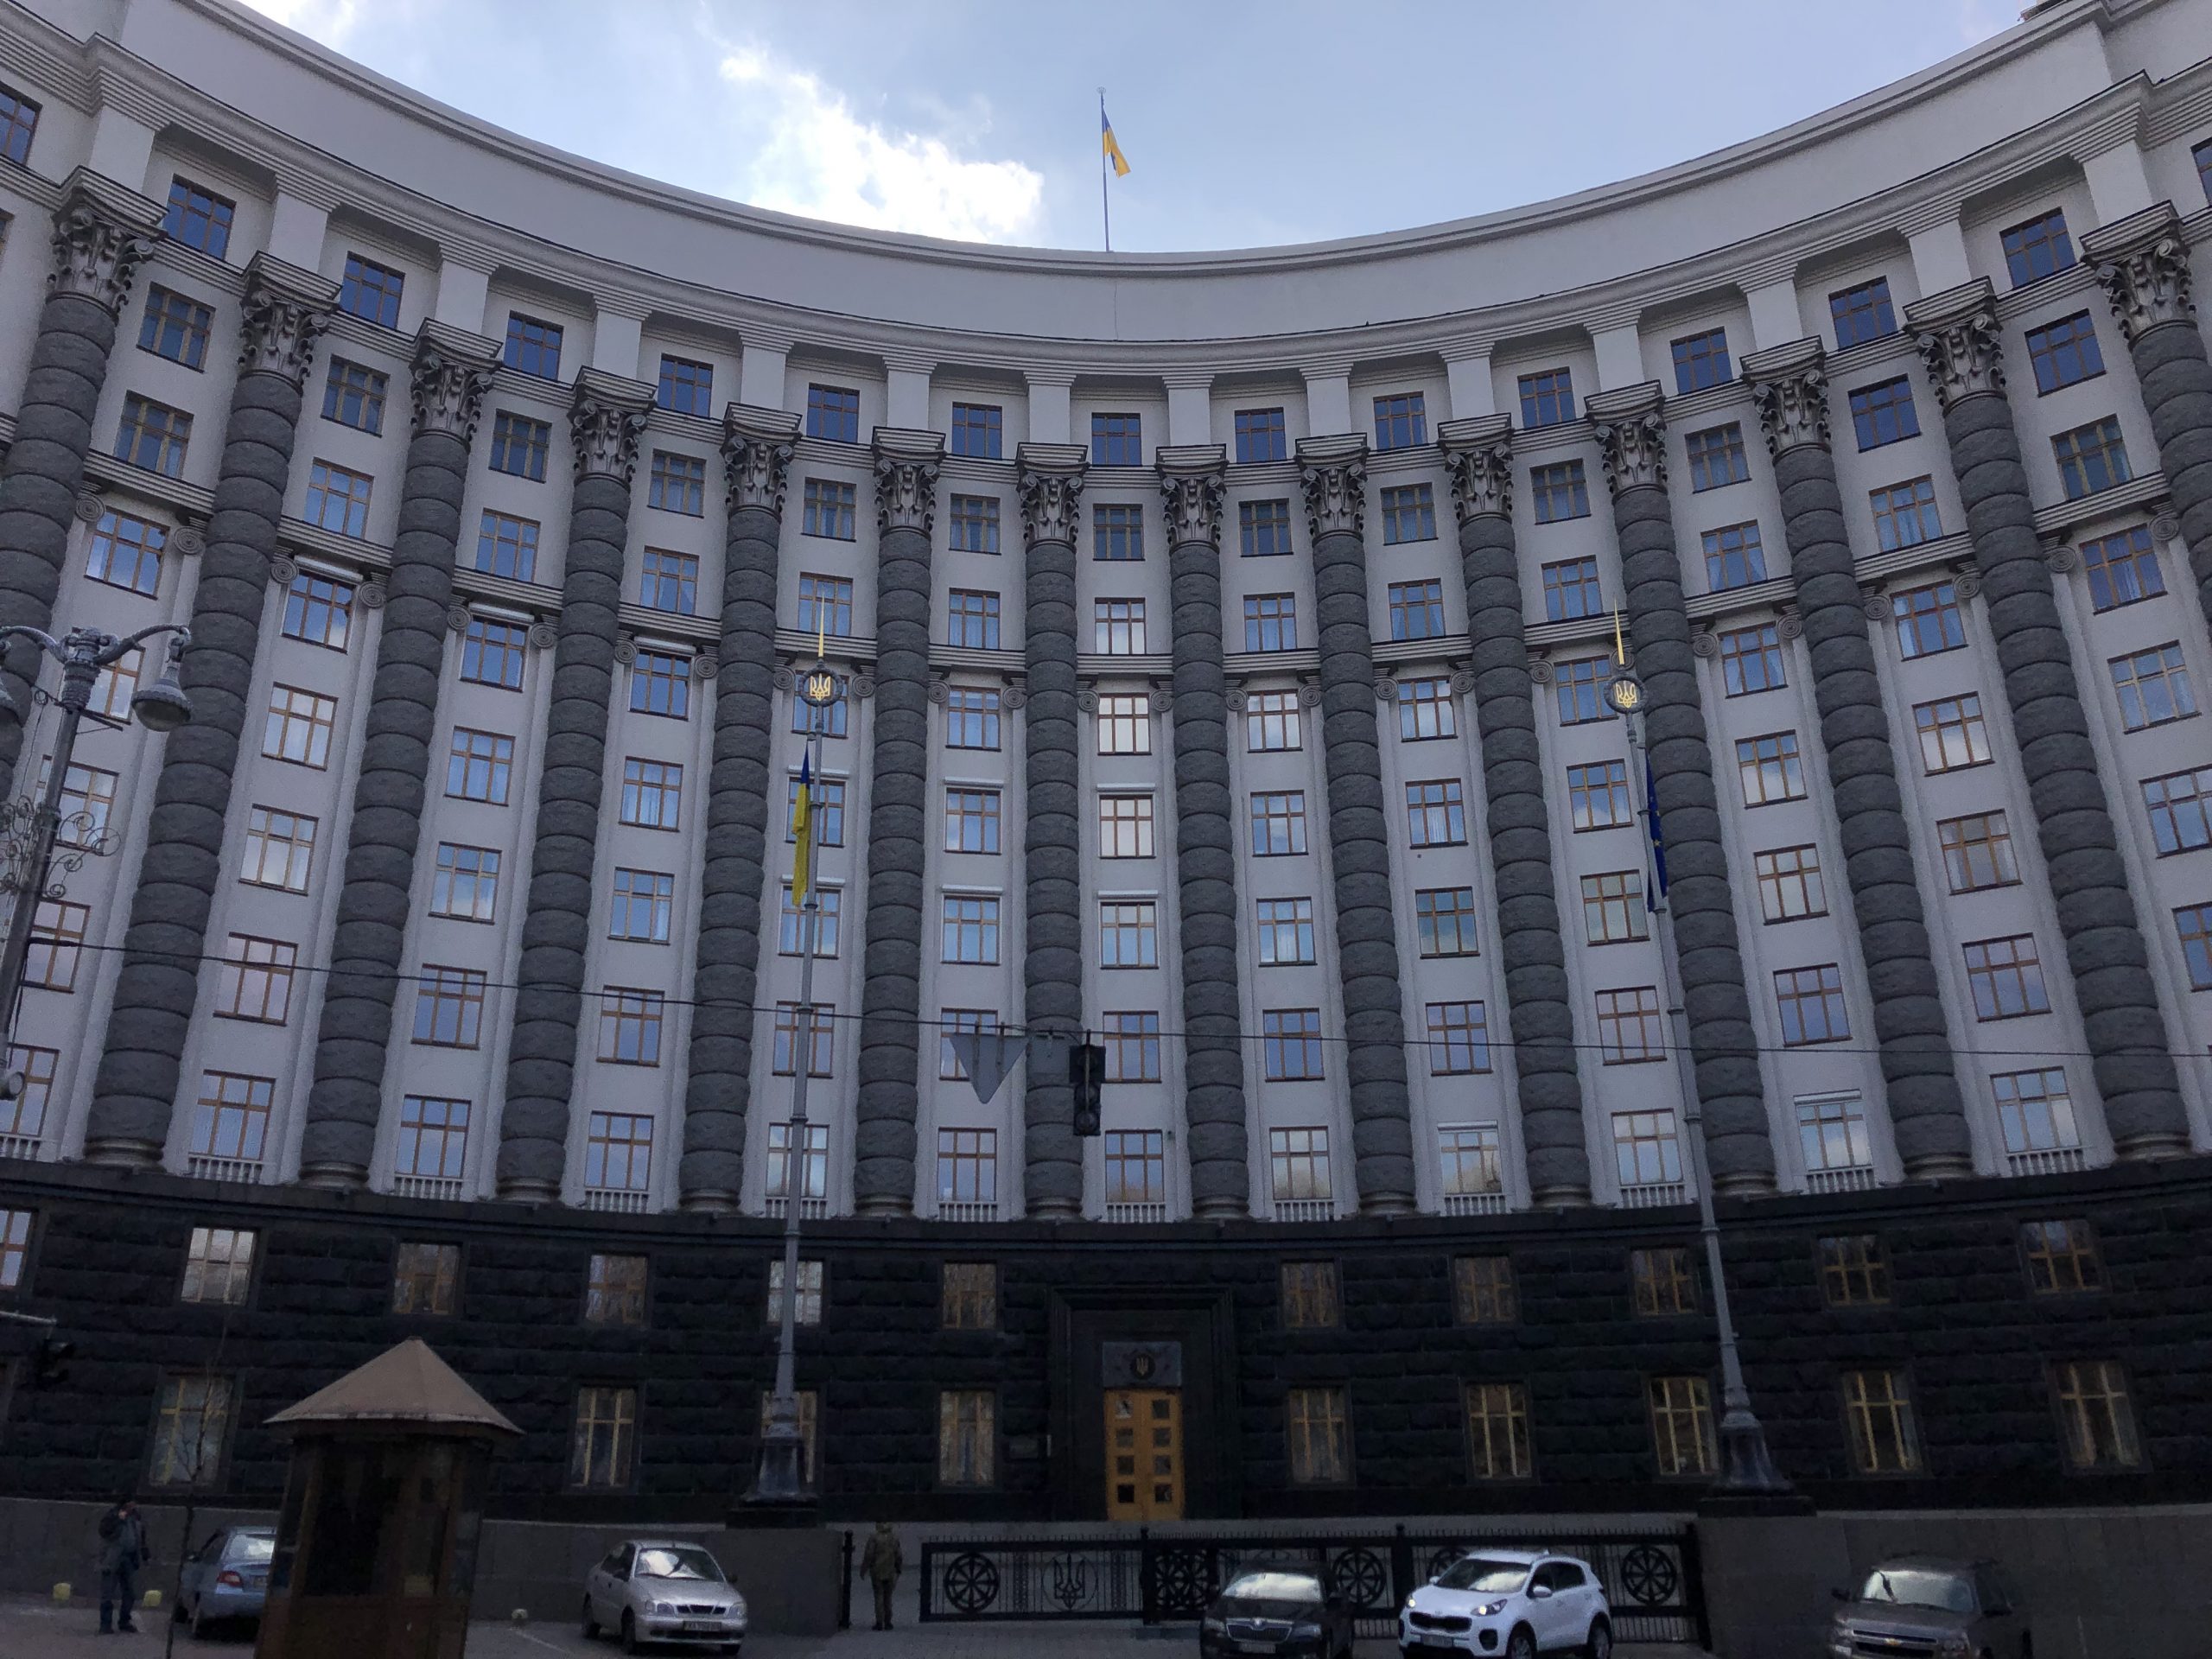 Ministry of Foreign Affairs in Kyiv, Ukraine